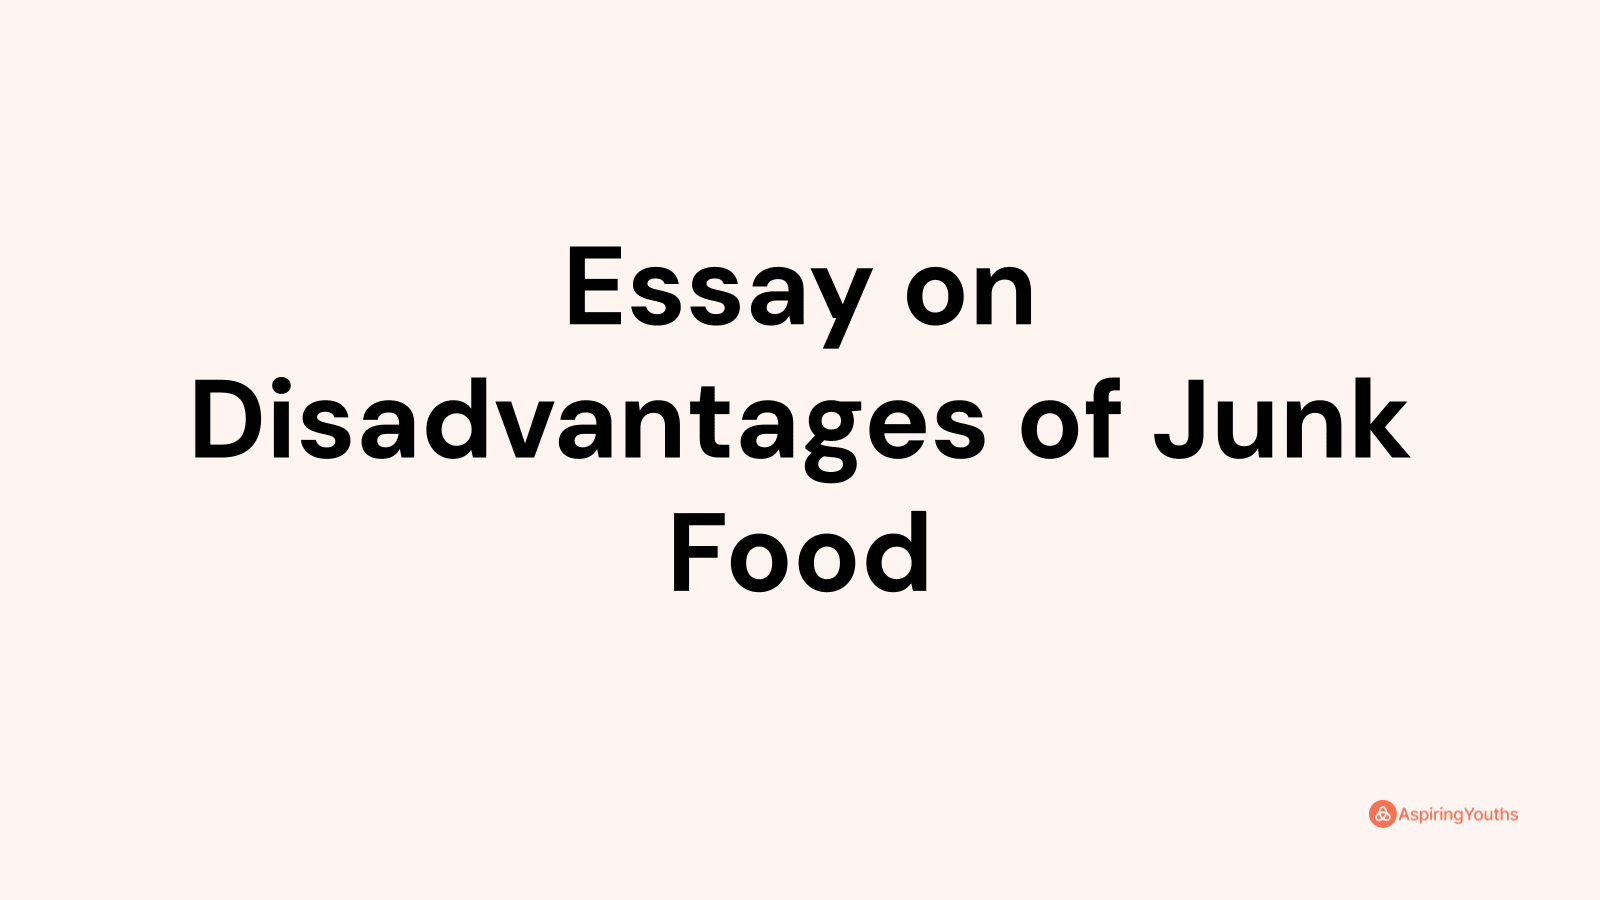 write an essay on disadvantages of junk food